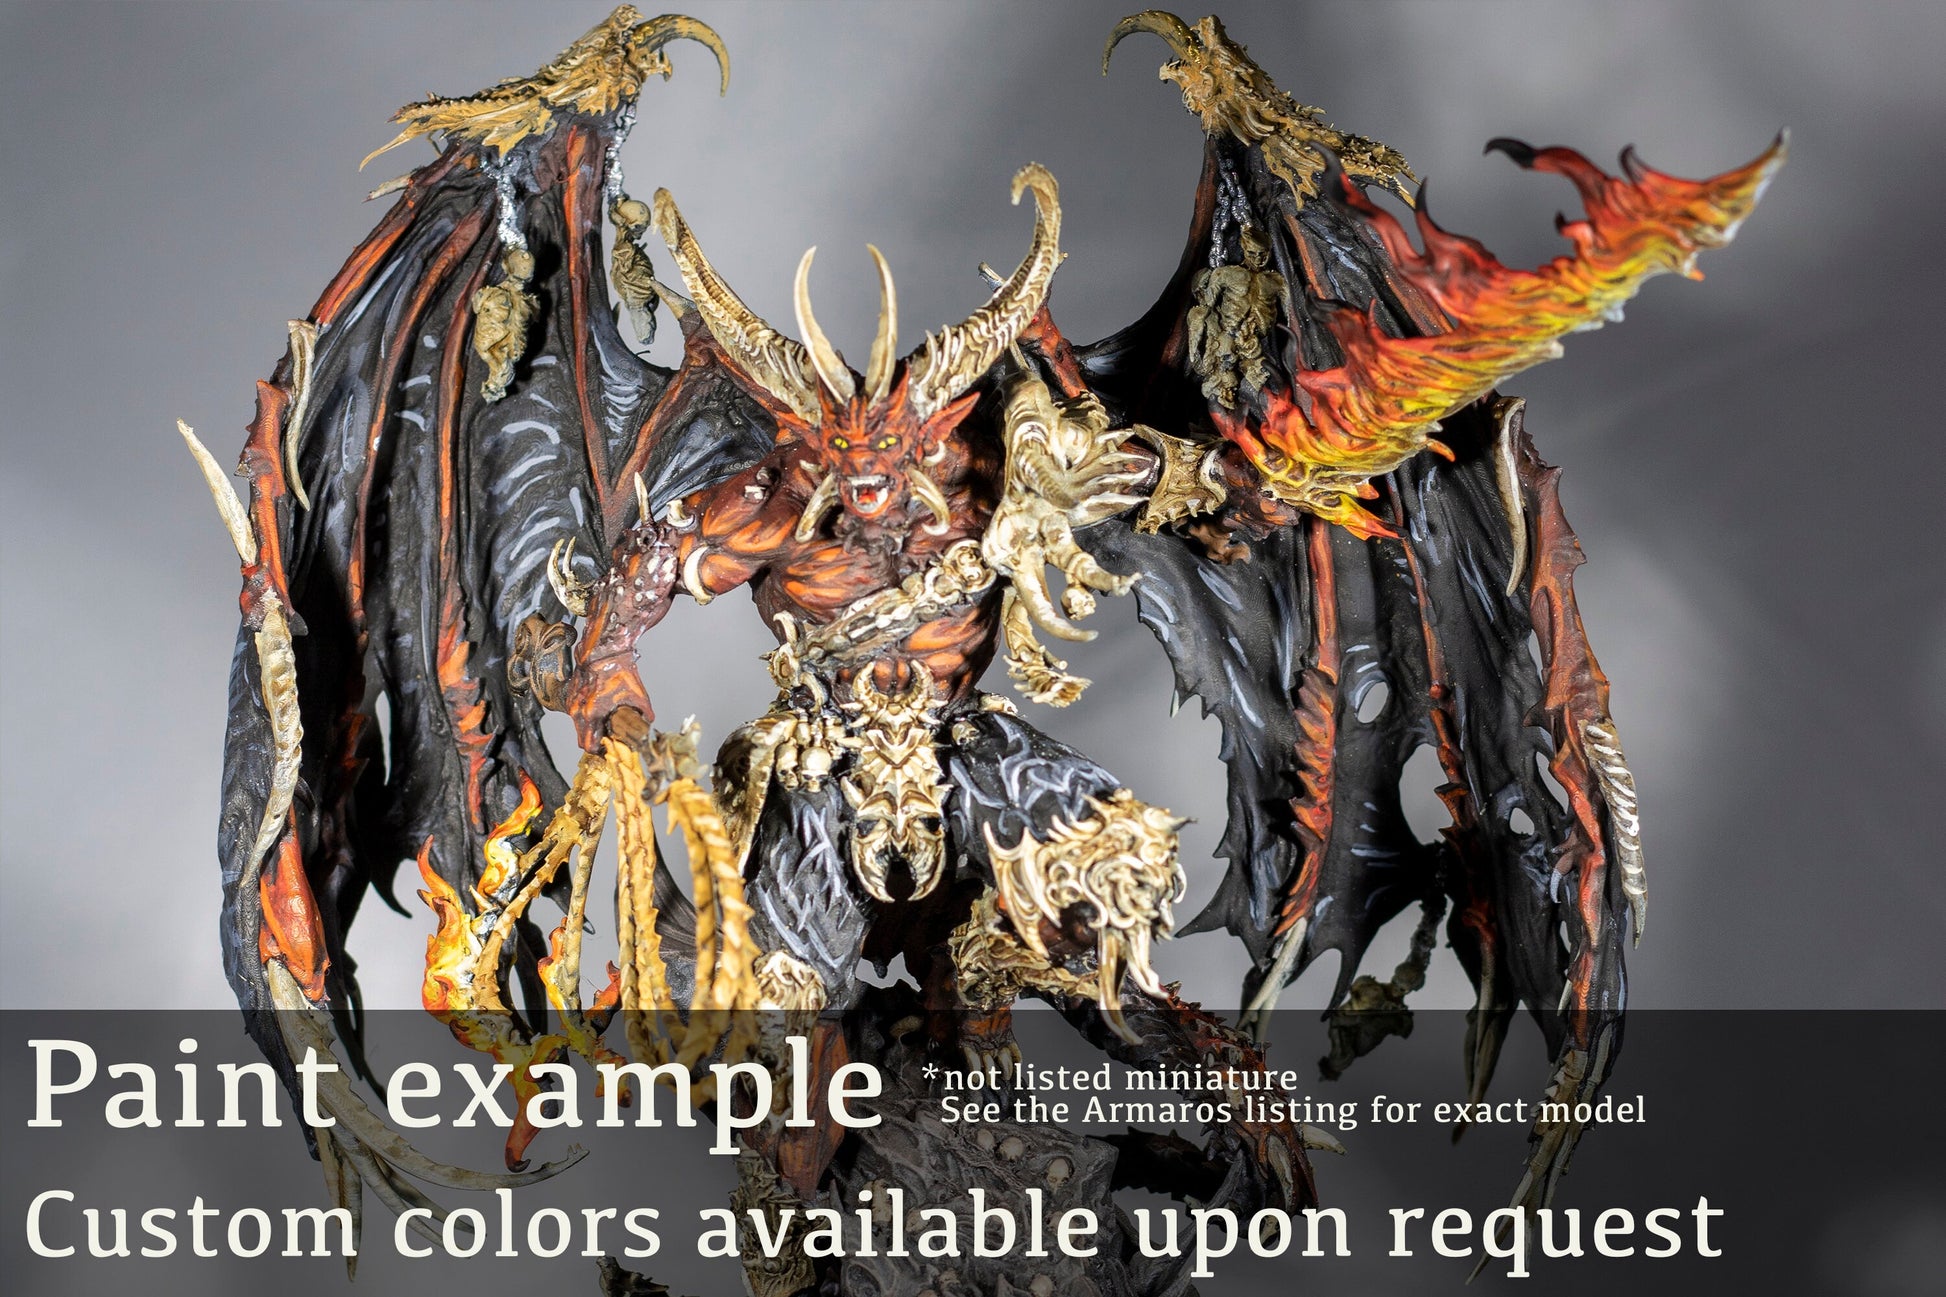 Slaudrul, the Aboleth PAINTED MODEL - Archvillain Games Printed Miniature | Dungeons & Dragons | Pathfinder | Tabletop